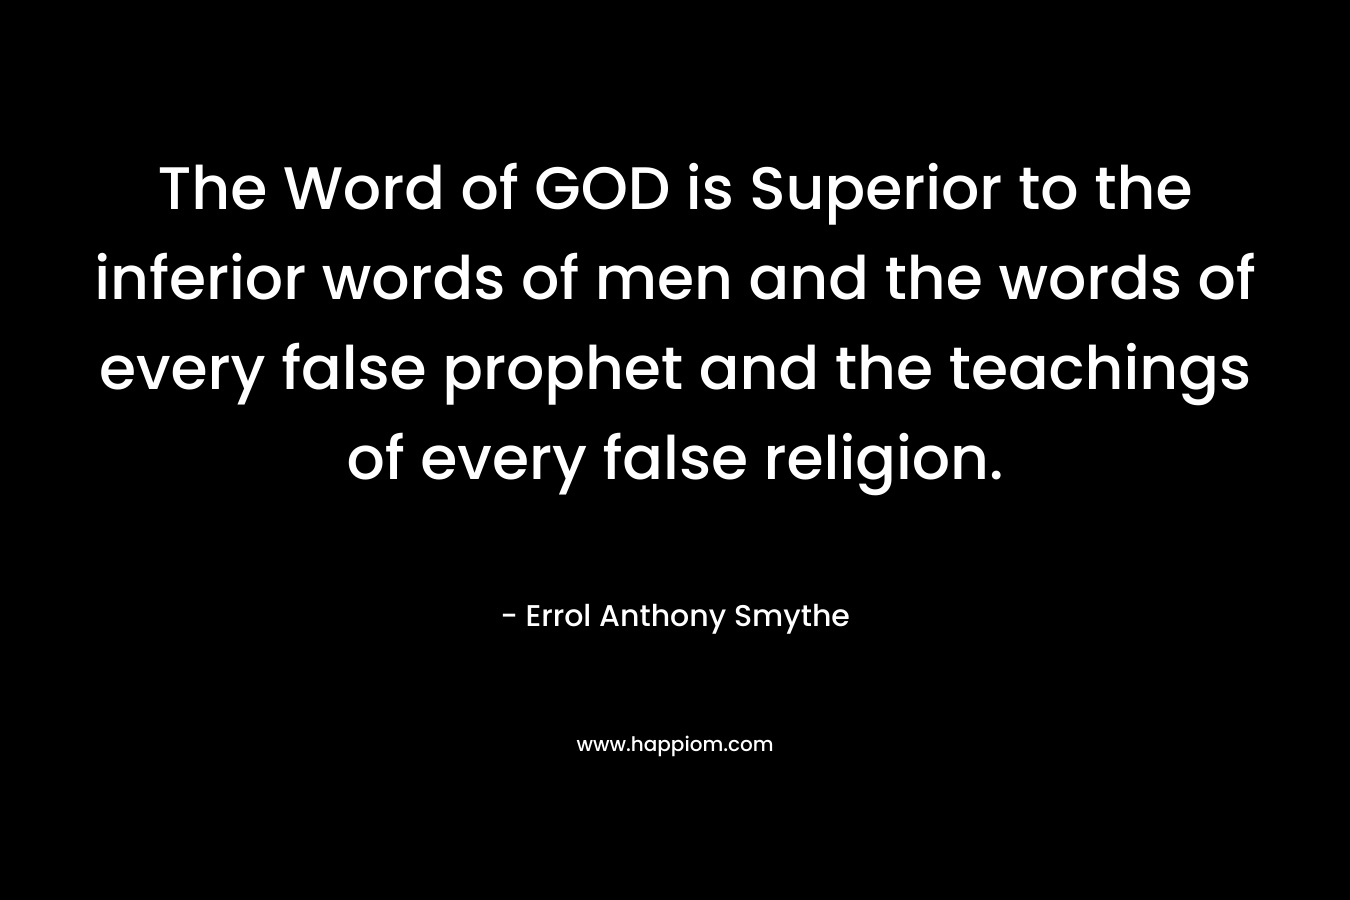 The Word of GOD is Superior to the inferior words of men and the words of every false prophet and the teachings of every false religion.